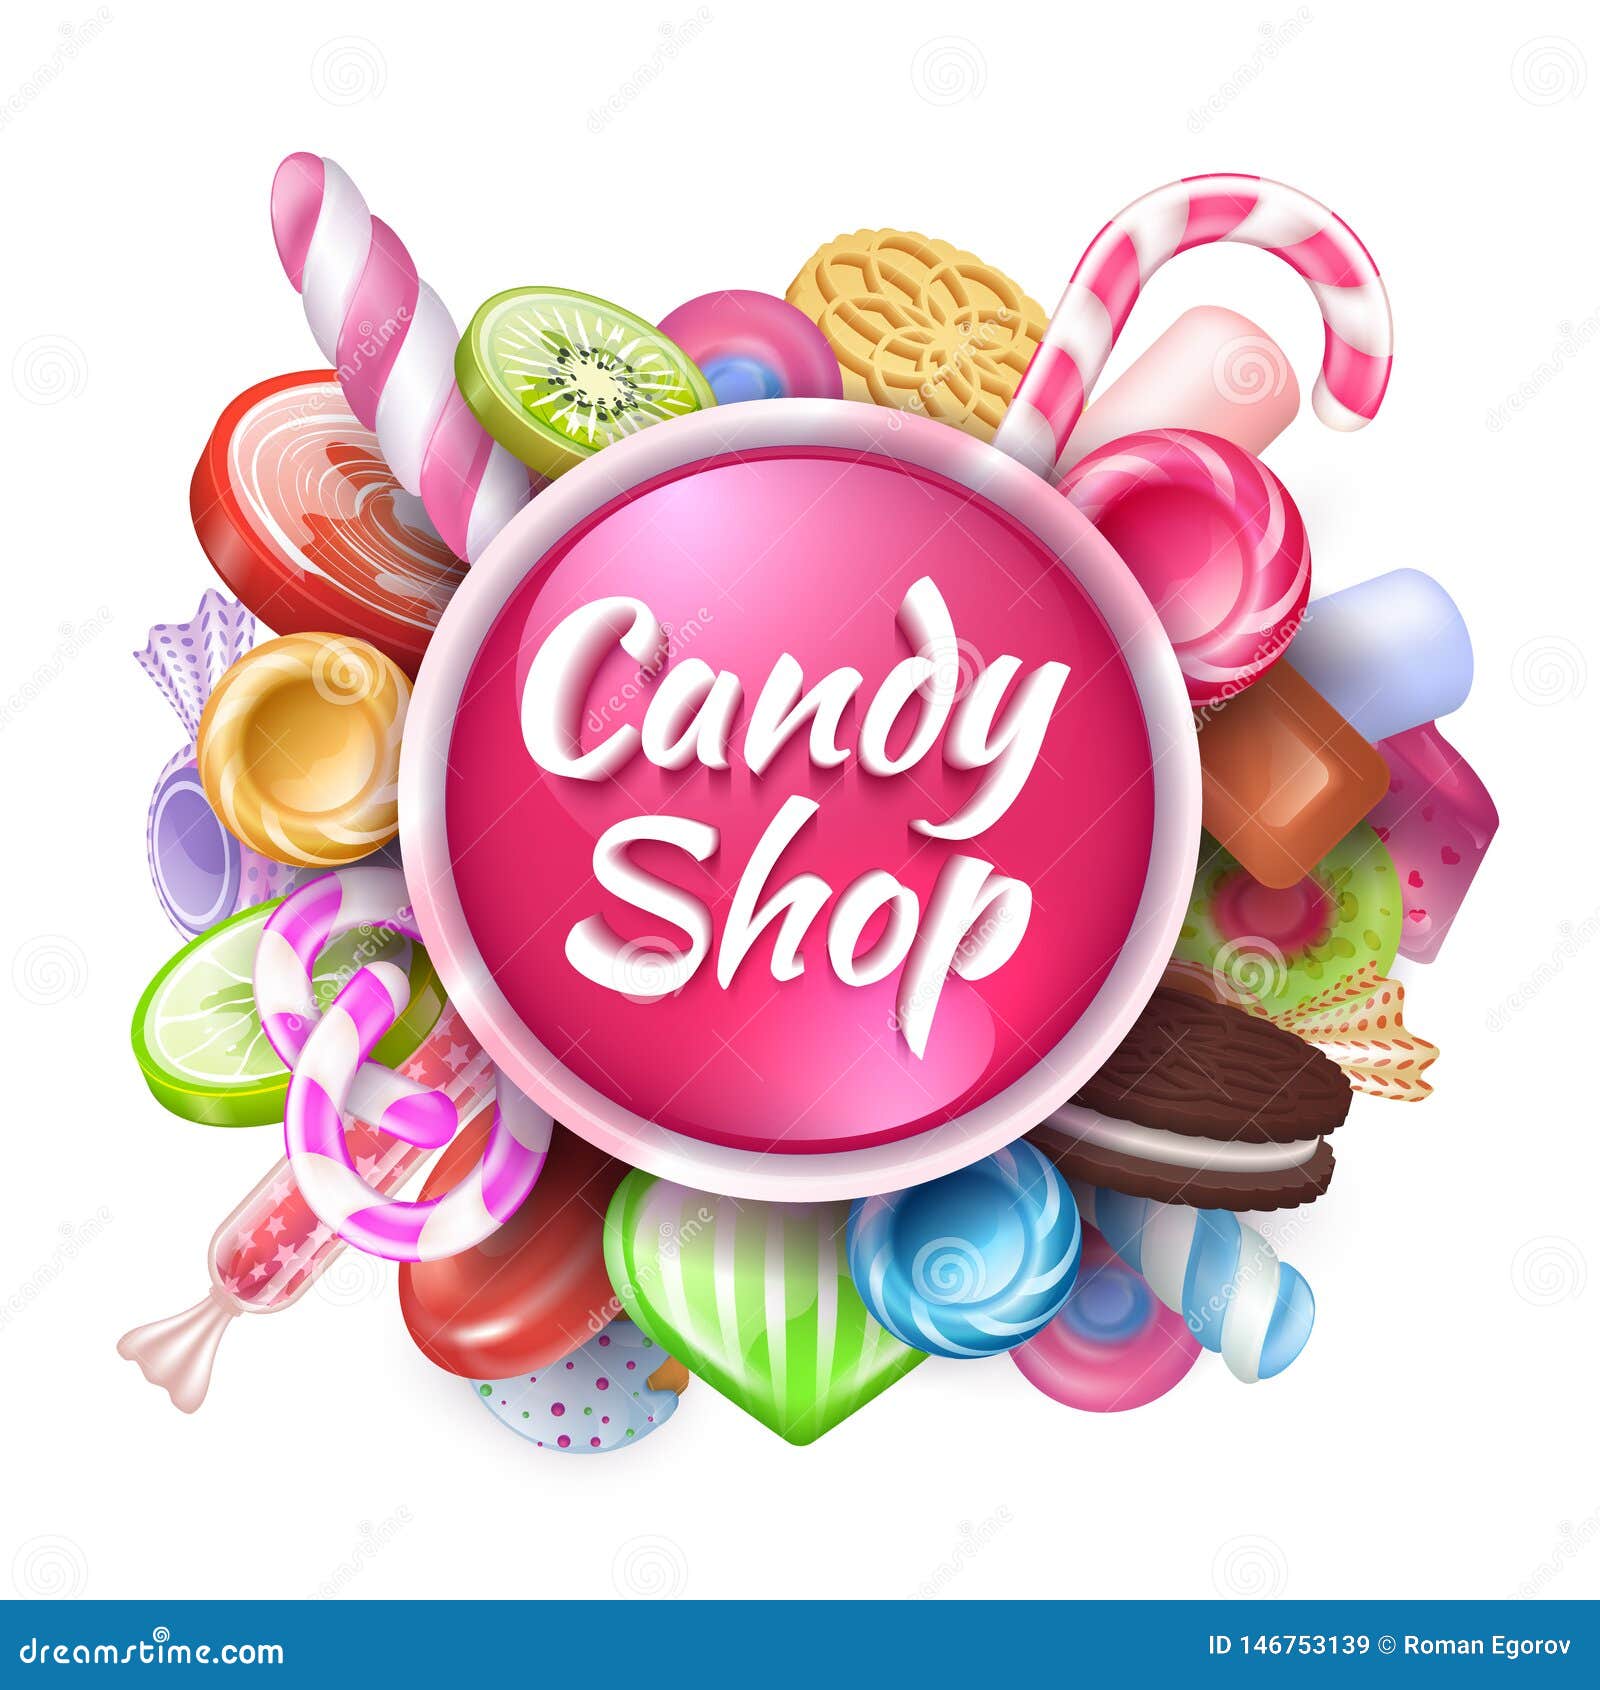 candies background. realistic sweets and desserts frame with text, colorful toffees lollipops and caramel bonbon. 